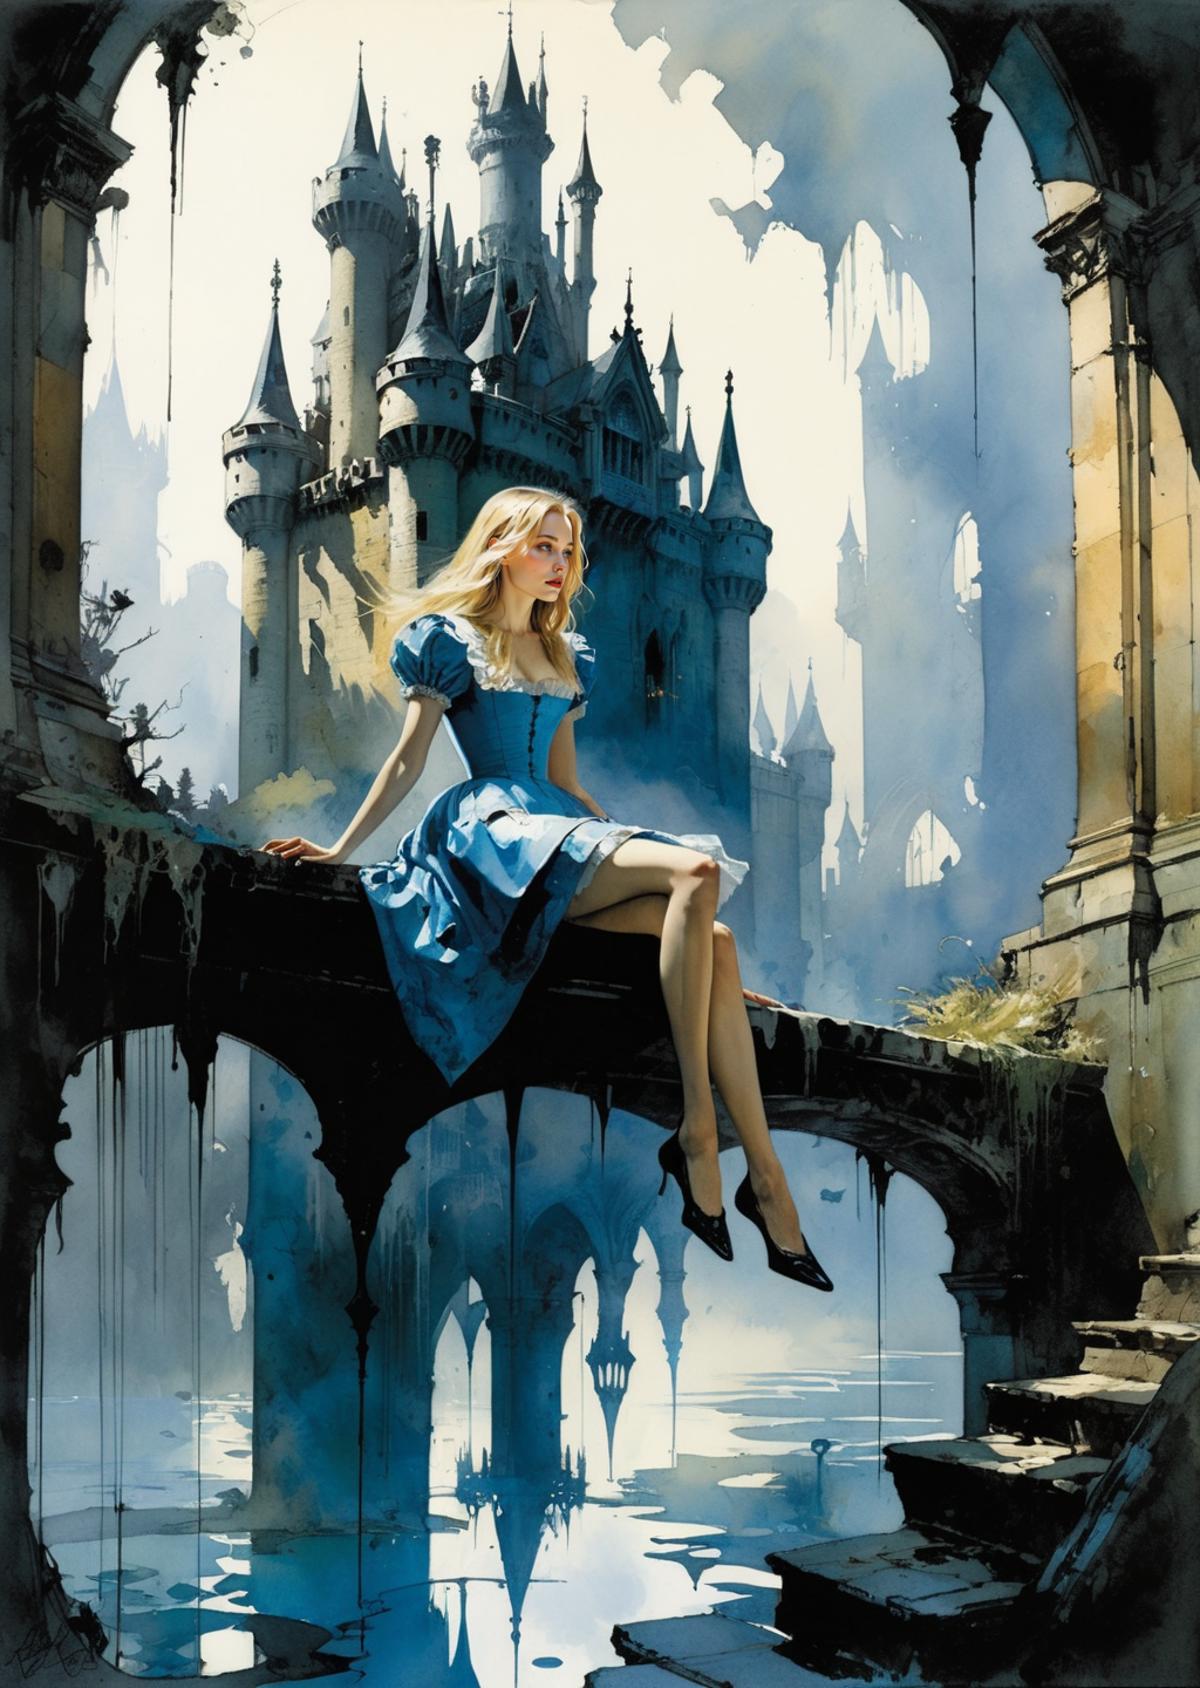 Artwork of a woman in a blue dress sitting on a bridge in front of a castle.